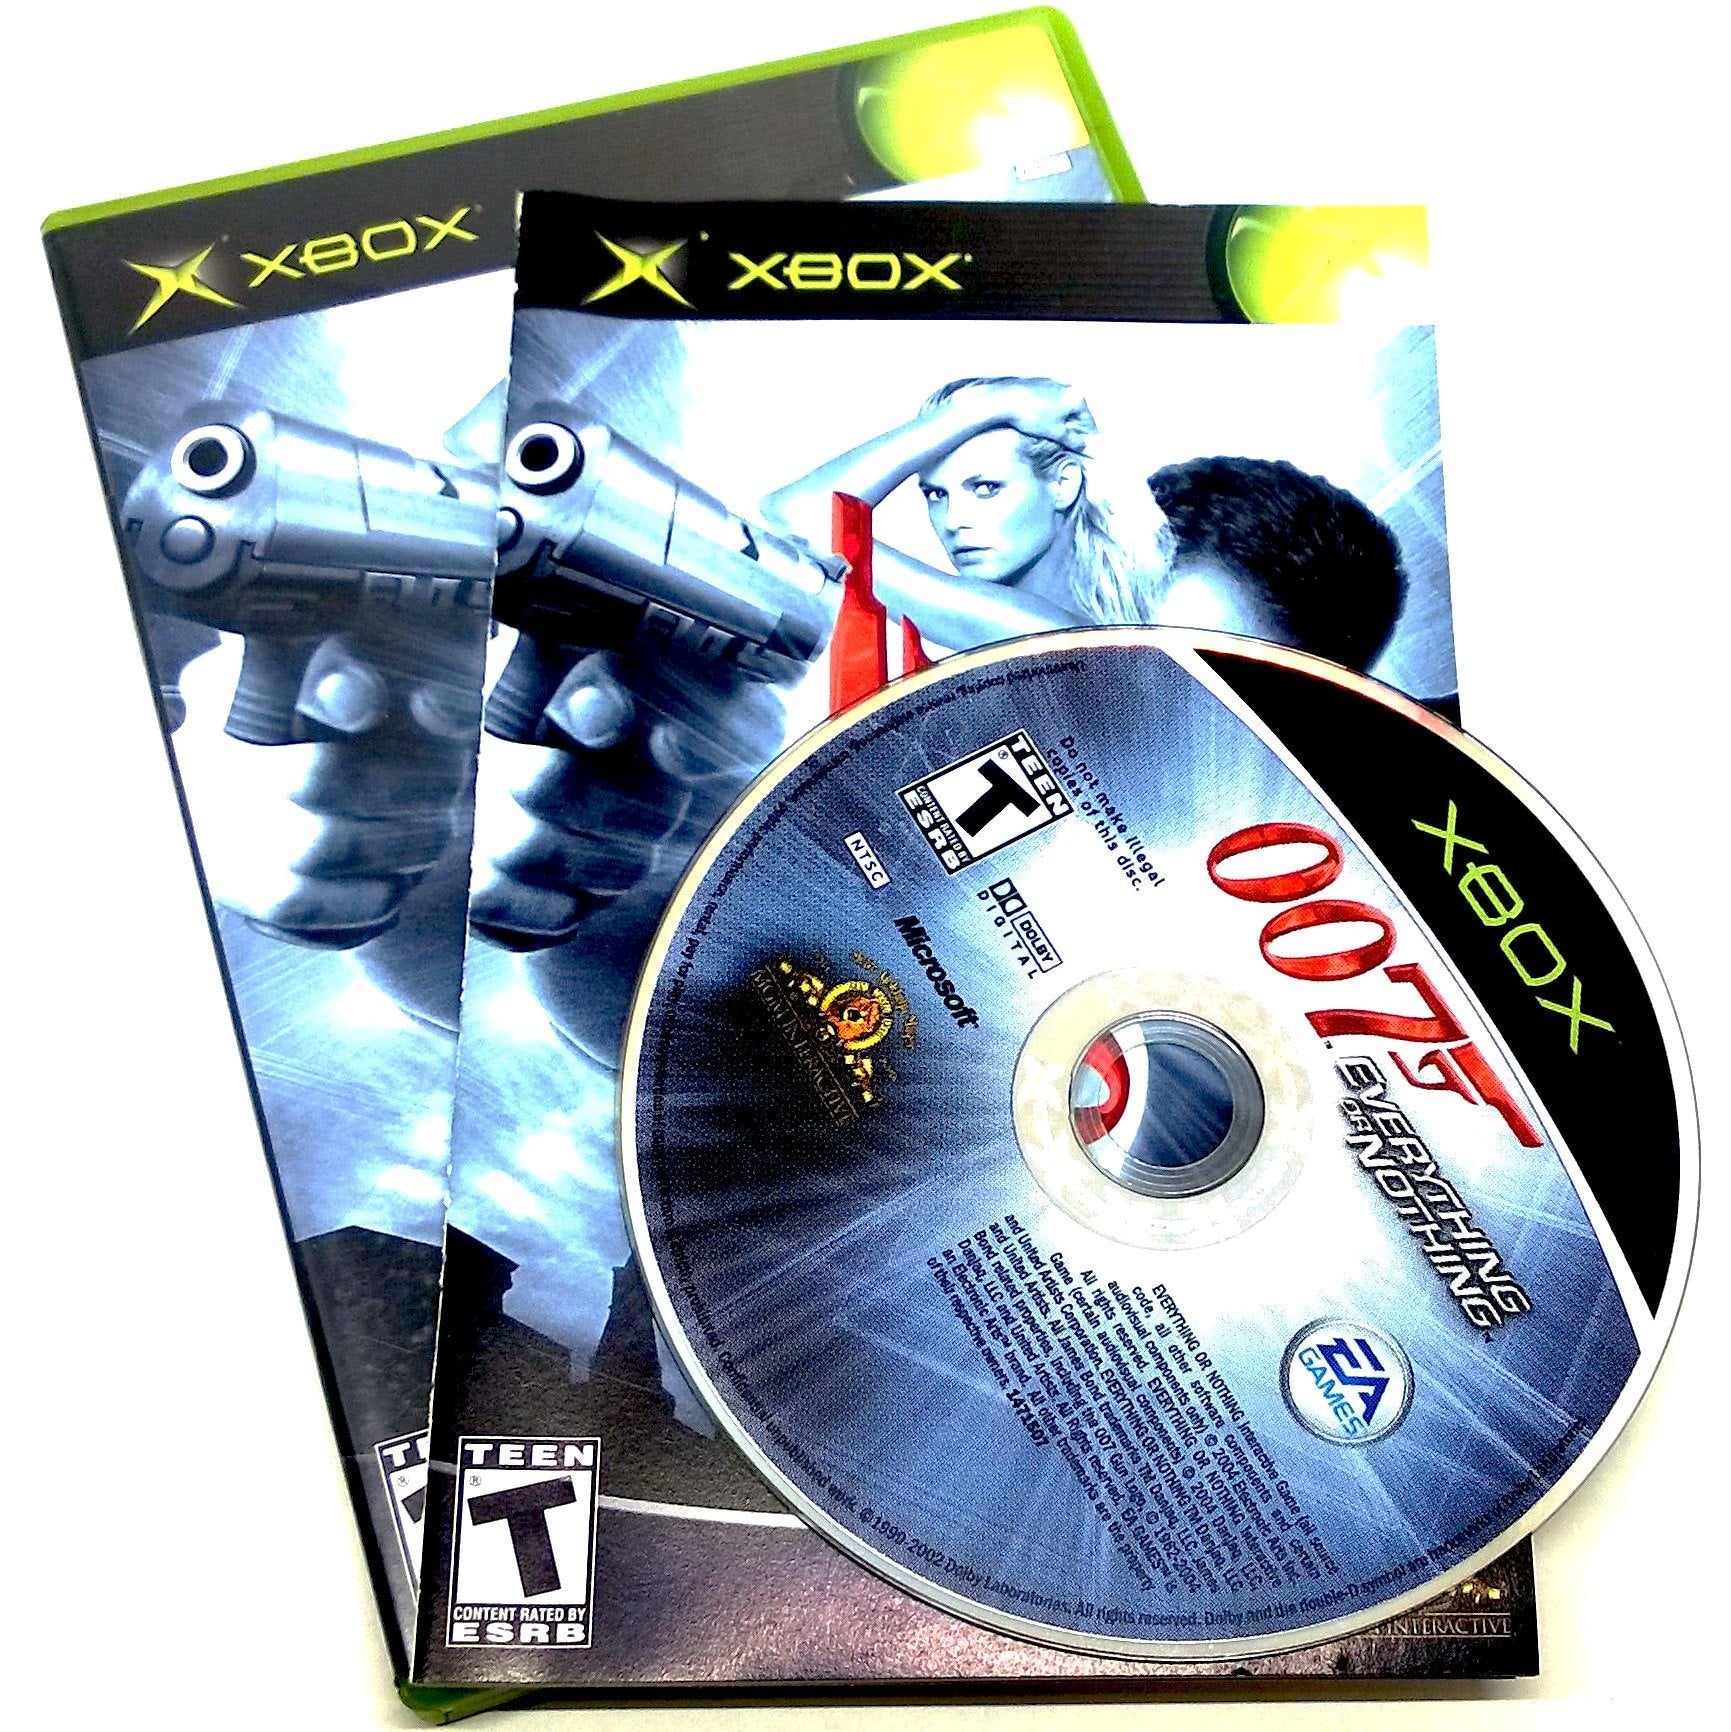 James Bond 007: Everything or Nothing for Xbox